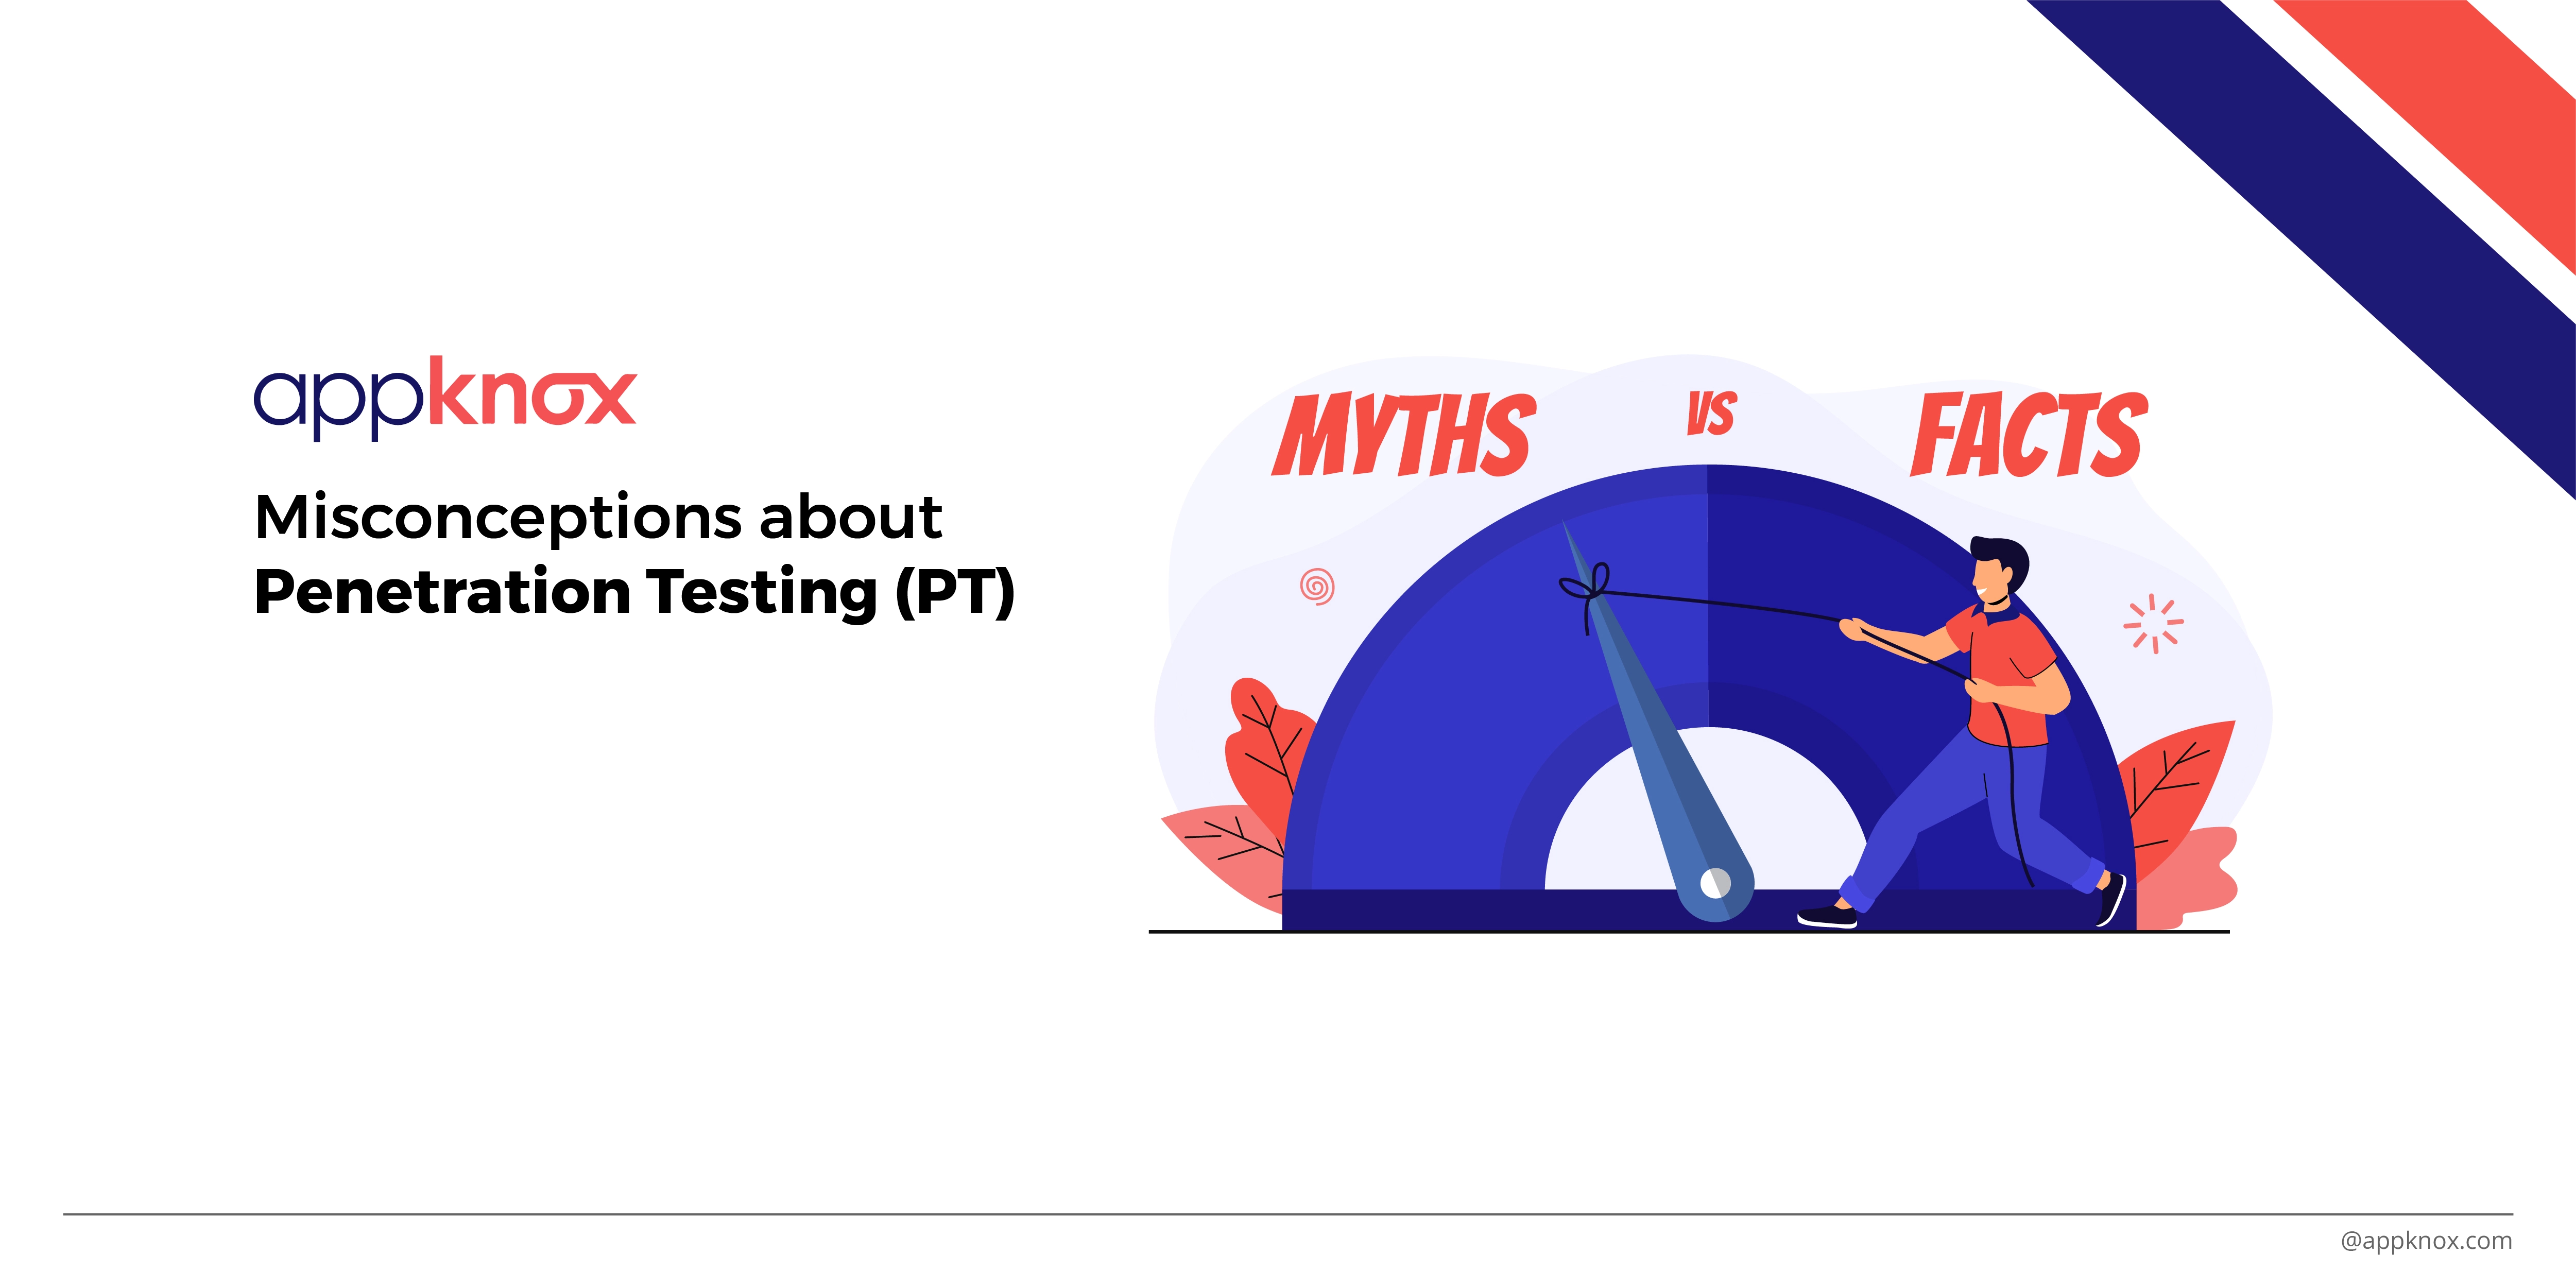 5 Myths about Mobile Application Penetration Testing - Debunked